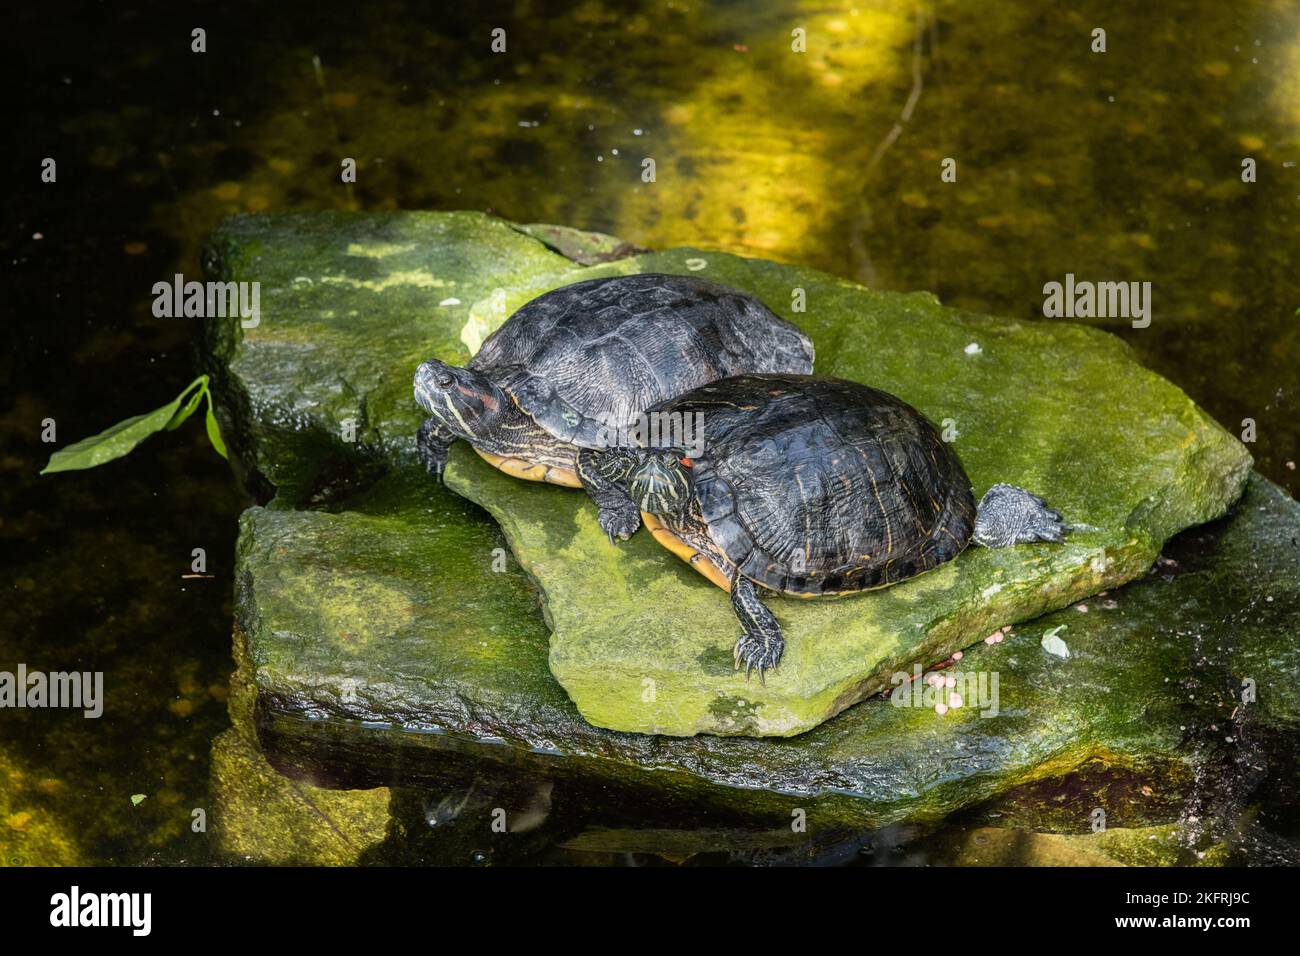 Two red-eared slider turtles at a botanical garden in Southern California Stock Photo